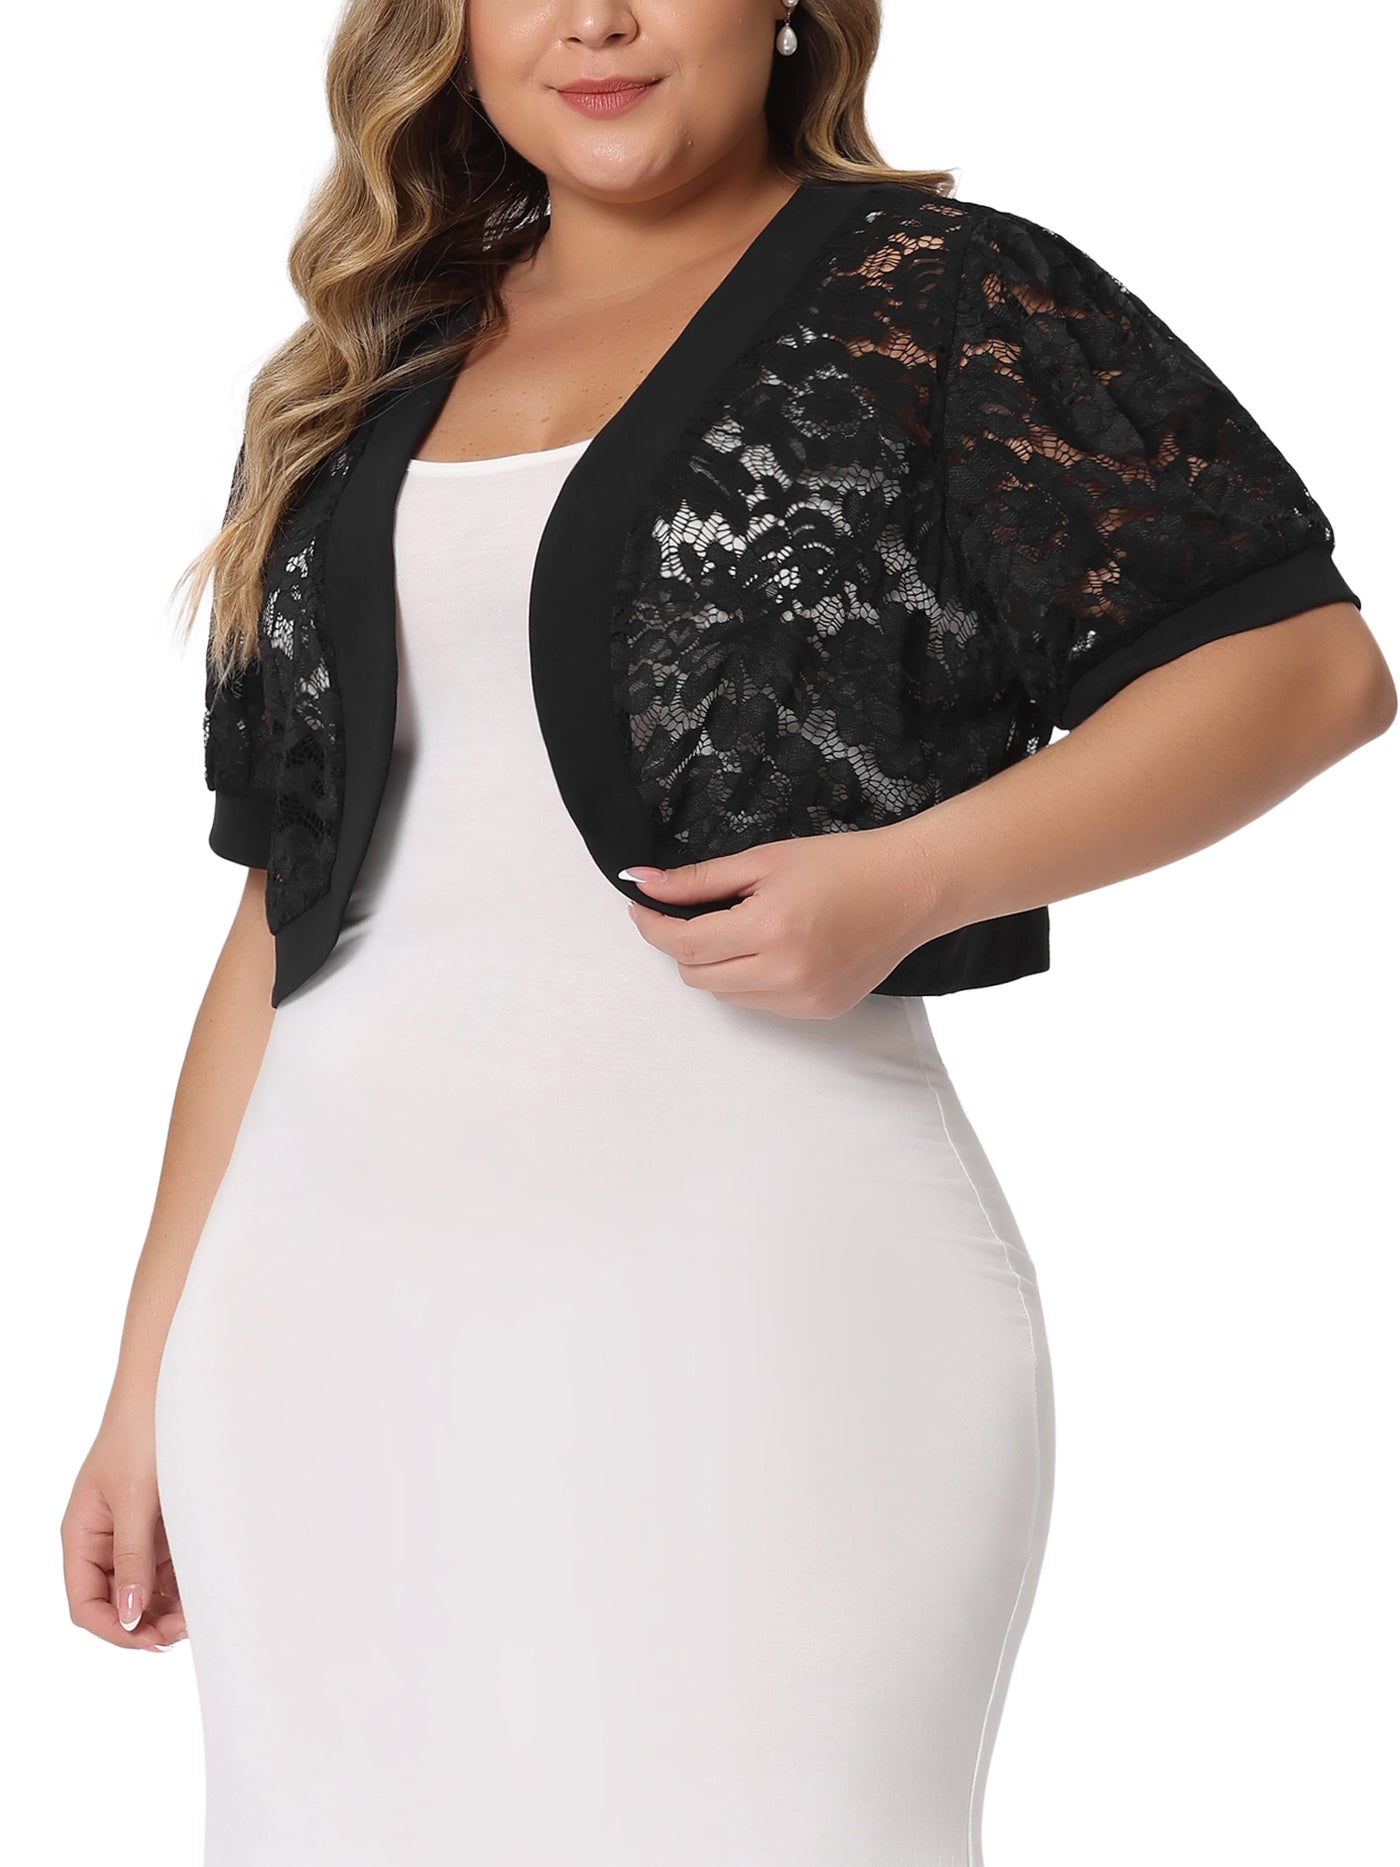 Bublédon Plus Size Cardigan for Women Short Sleeve Sheer Floral Lace Bolero Shrugs Open Front Cropped Cardigans